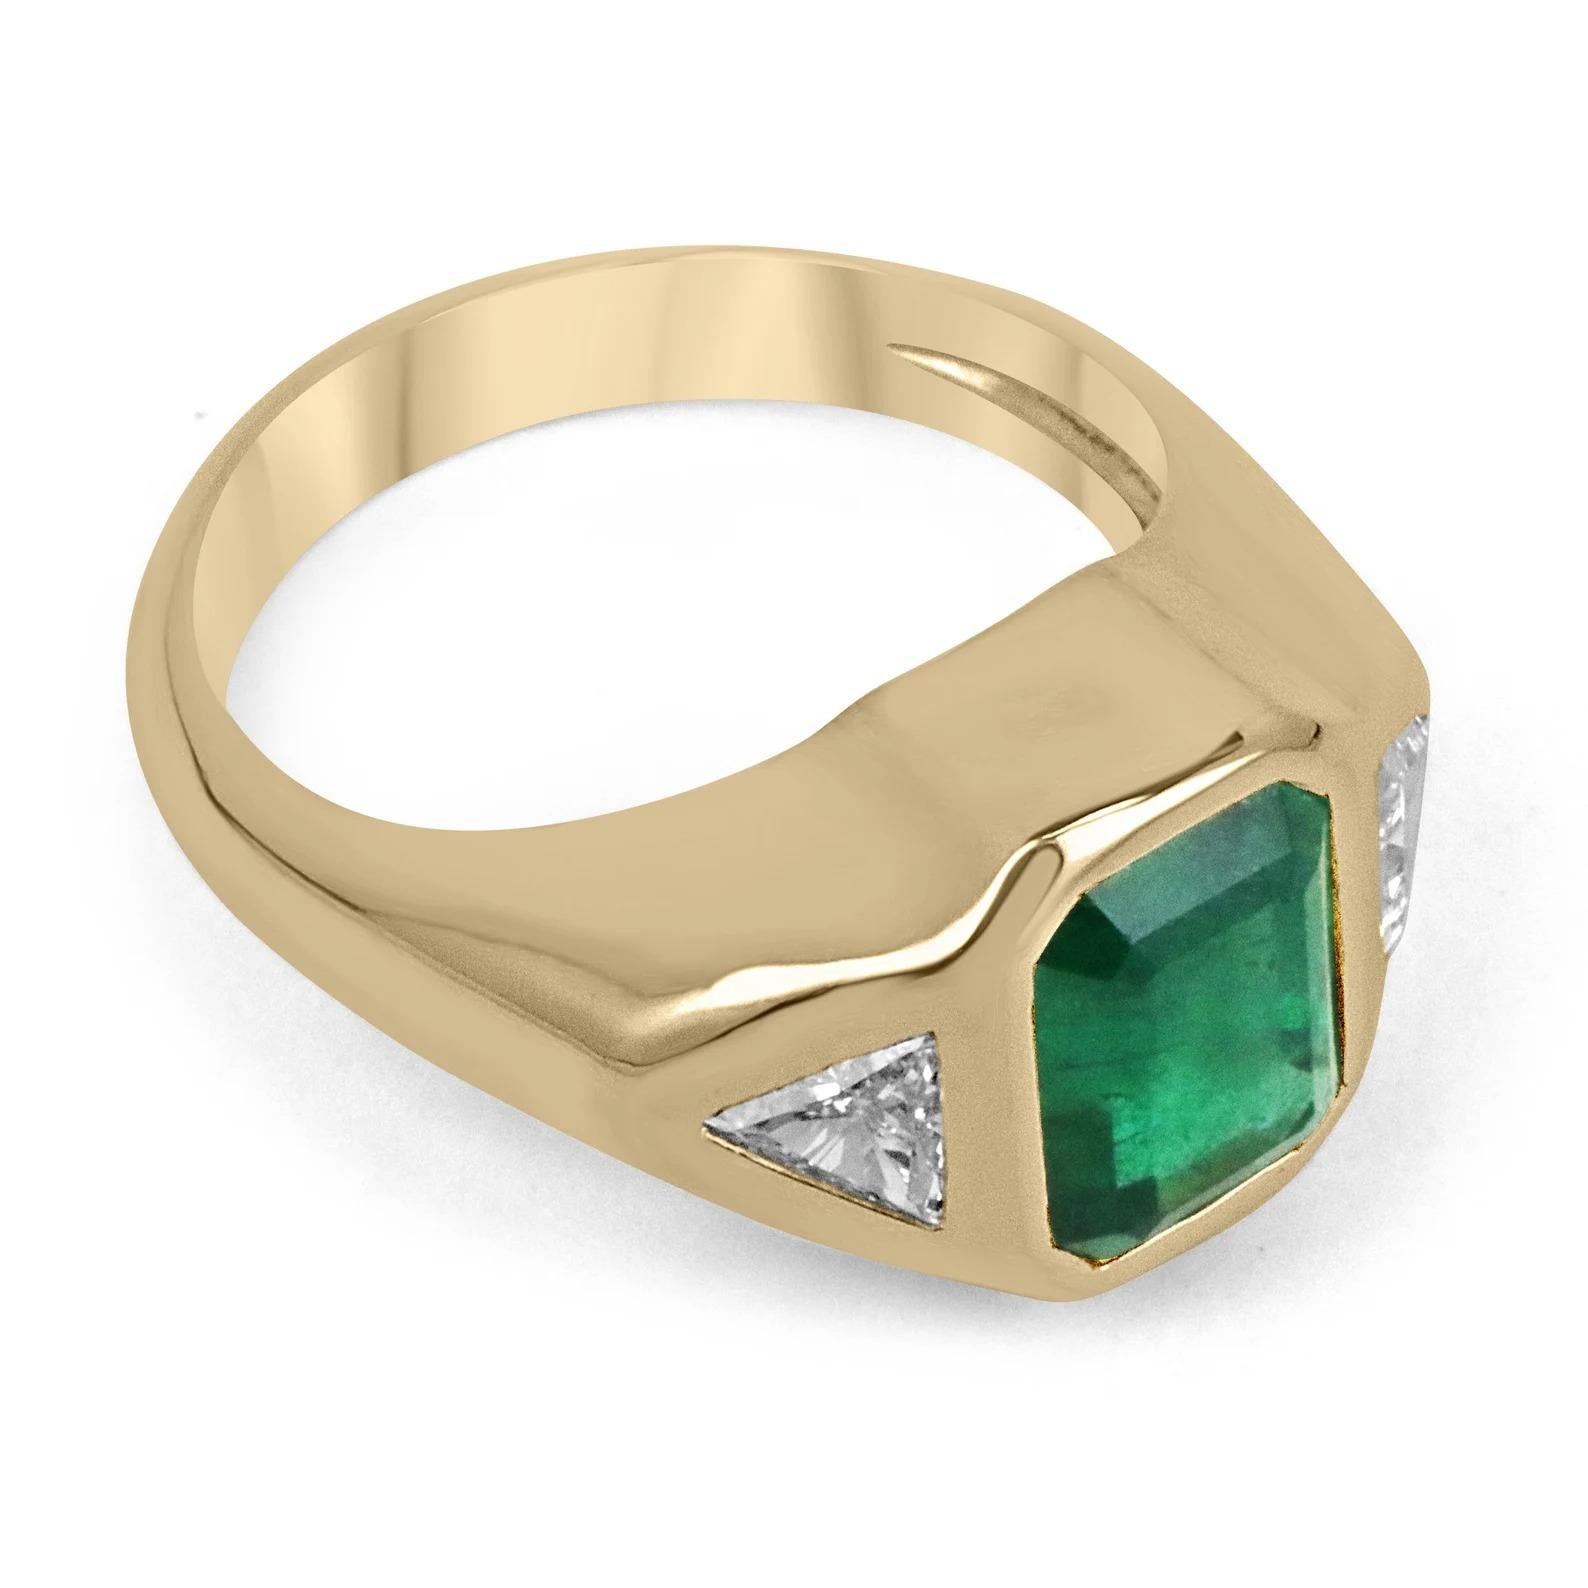 Featured here is a breathtaking, emerald and diamond gypsy ring. The center stone is a stunning AAA+ fine quality, 2.86-carat, natural emerald-emerald cut. This gemstone displays vivid green color and excellent luster. Accented on the sides are two